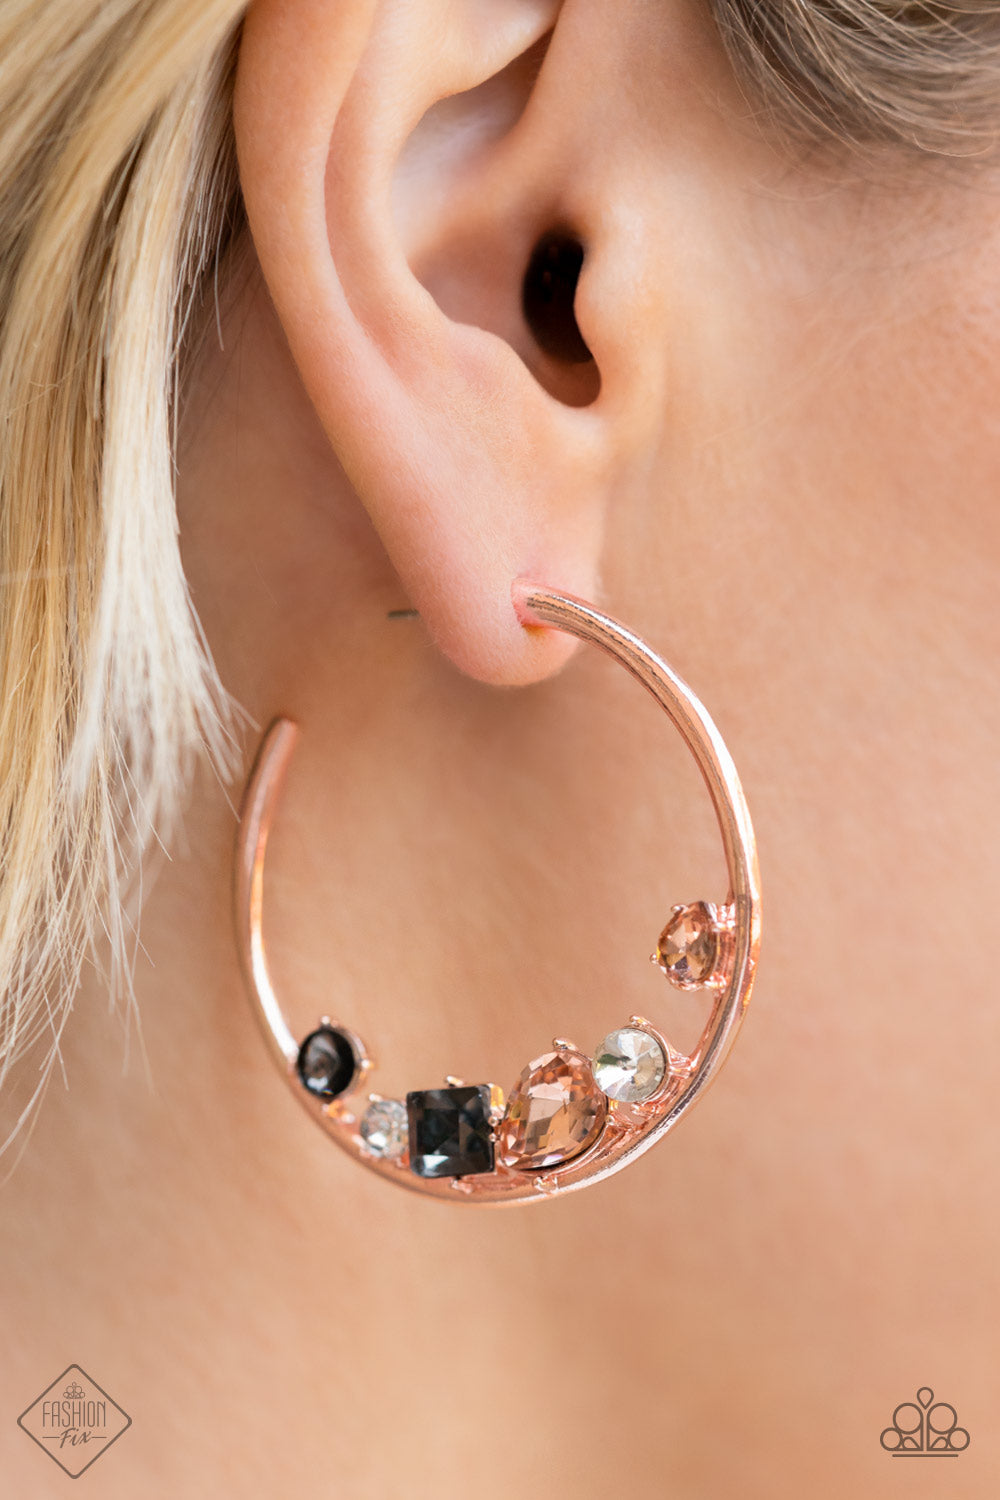 Attractive Allure - Rose Gold Hoop Earrings April 2022 Fashion Fix Exclusive - Princess Glam Shop